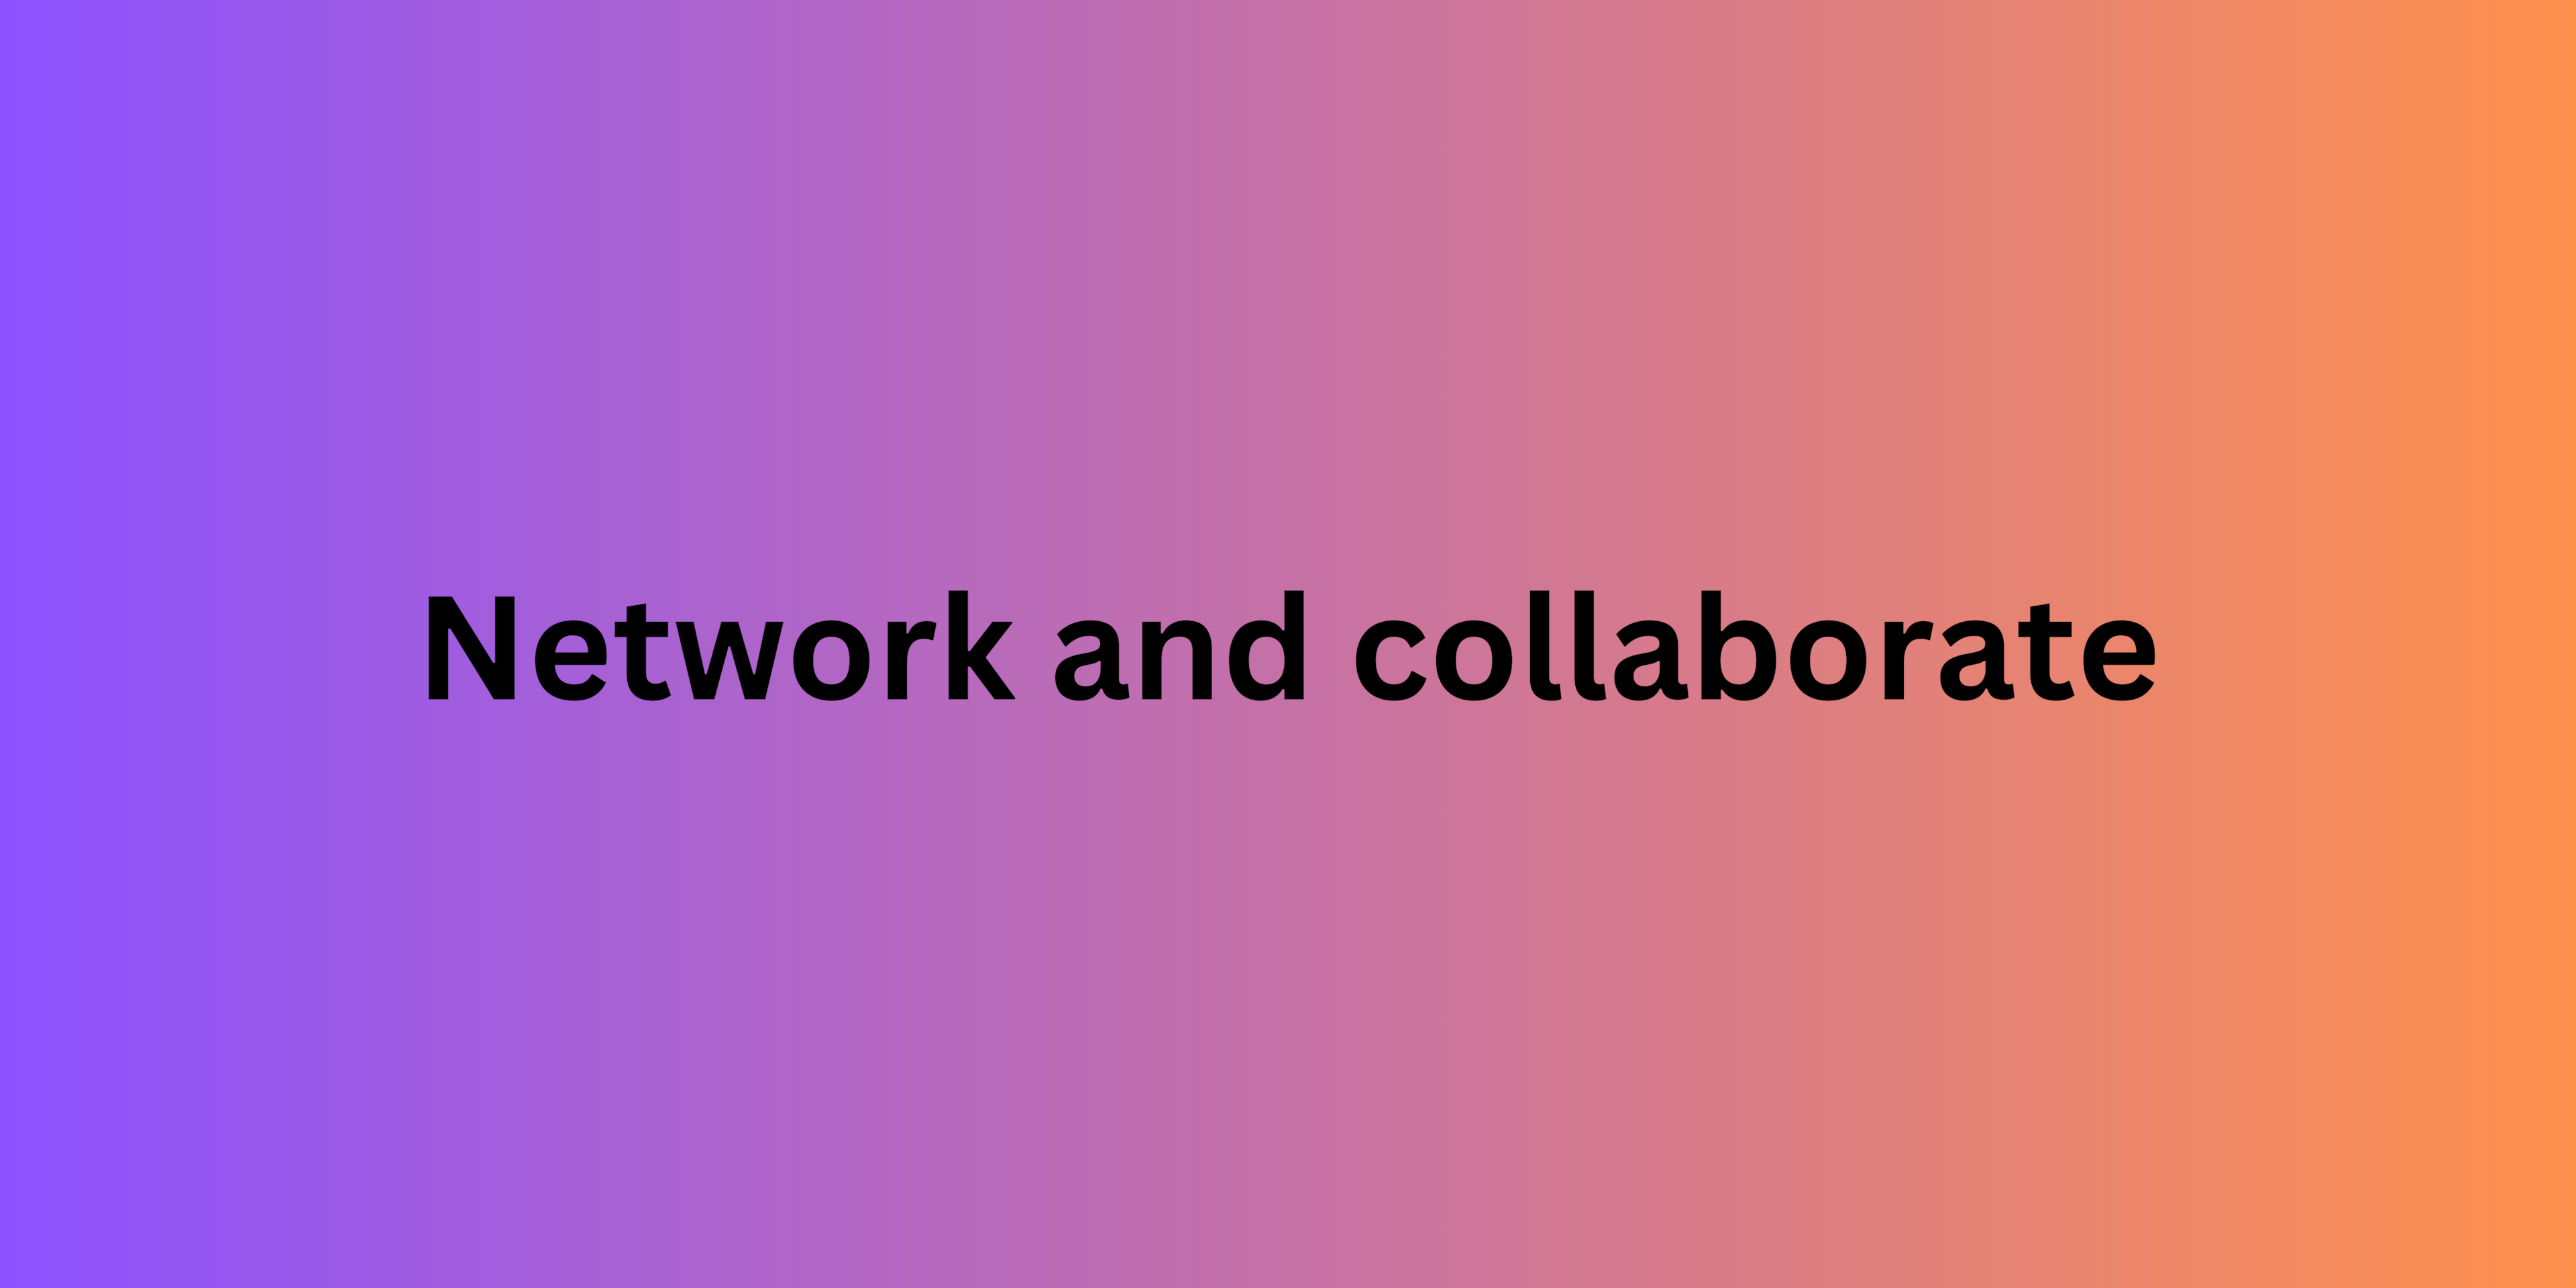 Network and collaborate